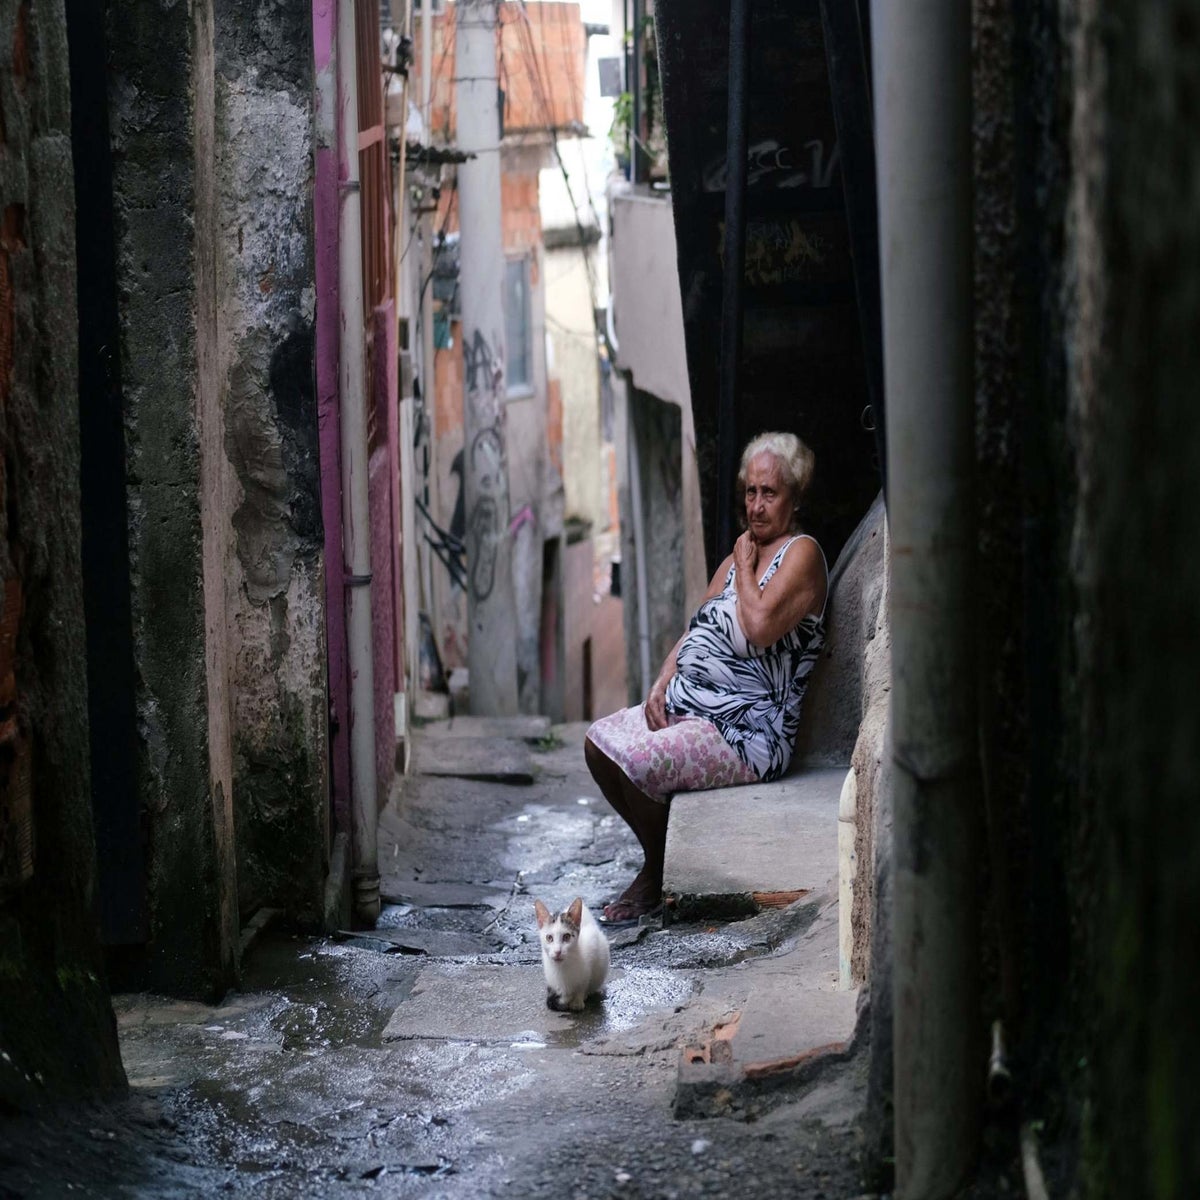 São Paulo's favelas are running out of food. These women are stepping in.